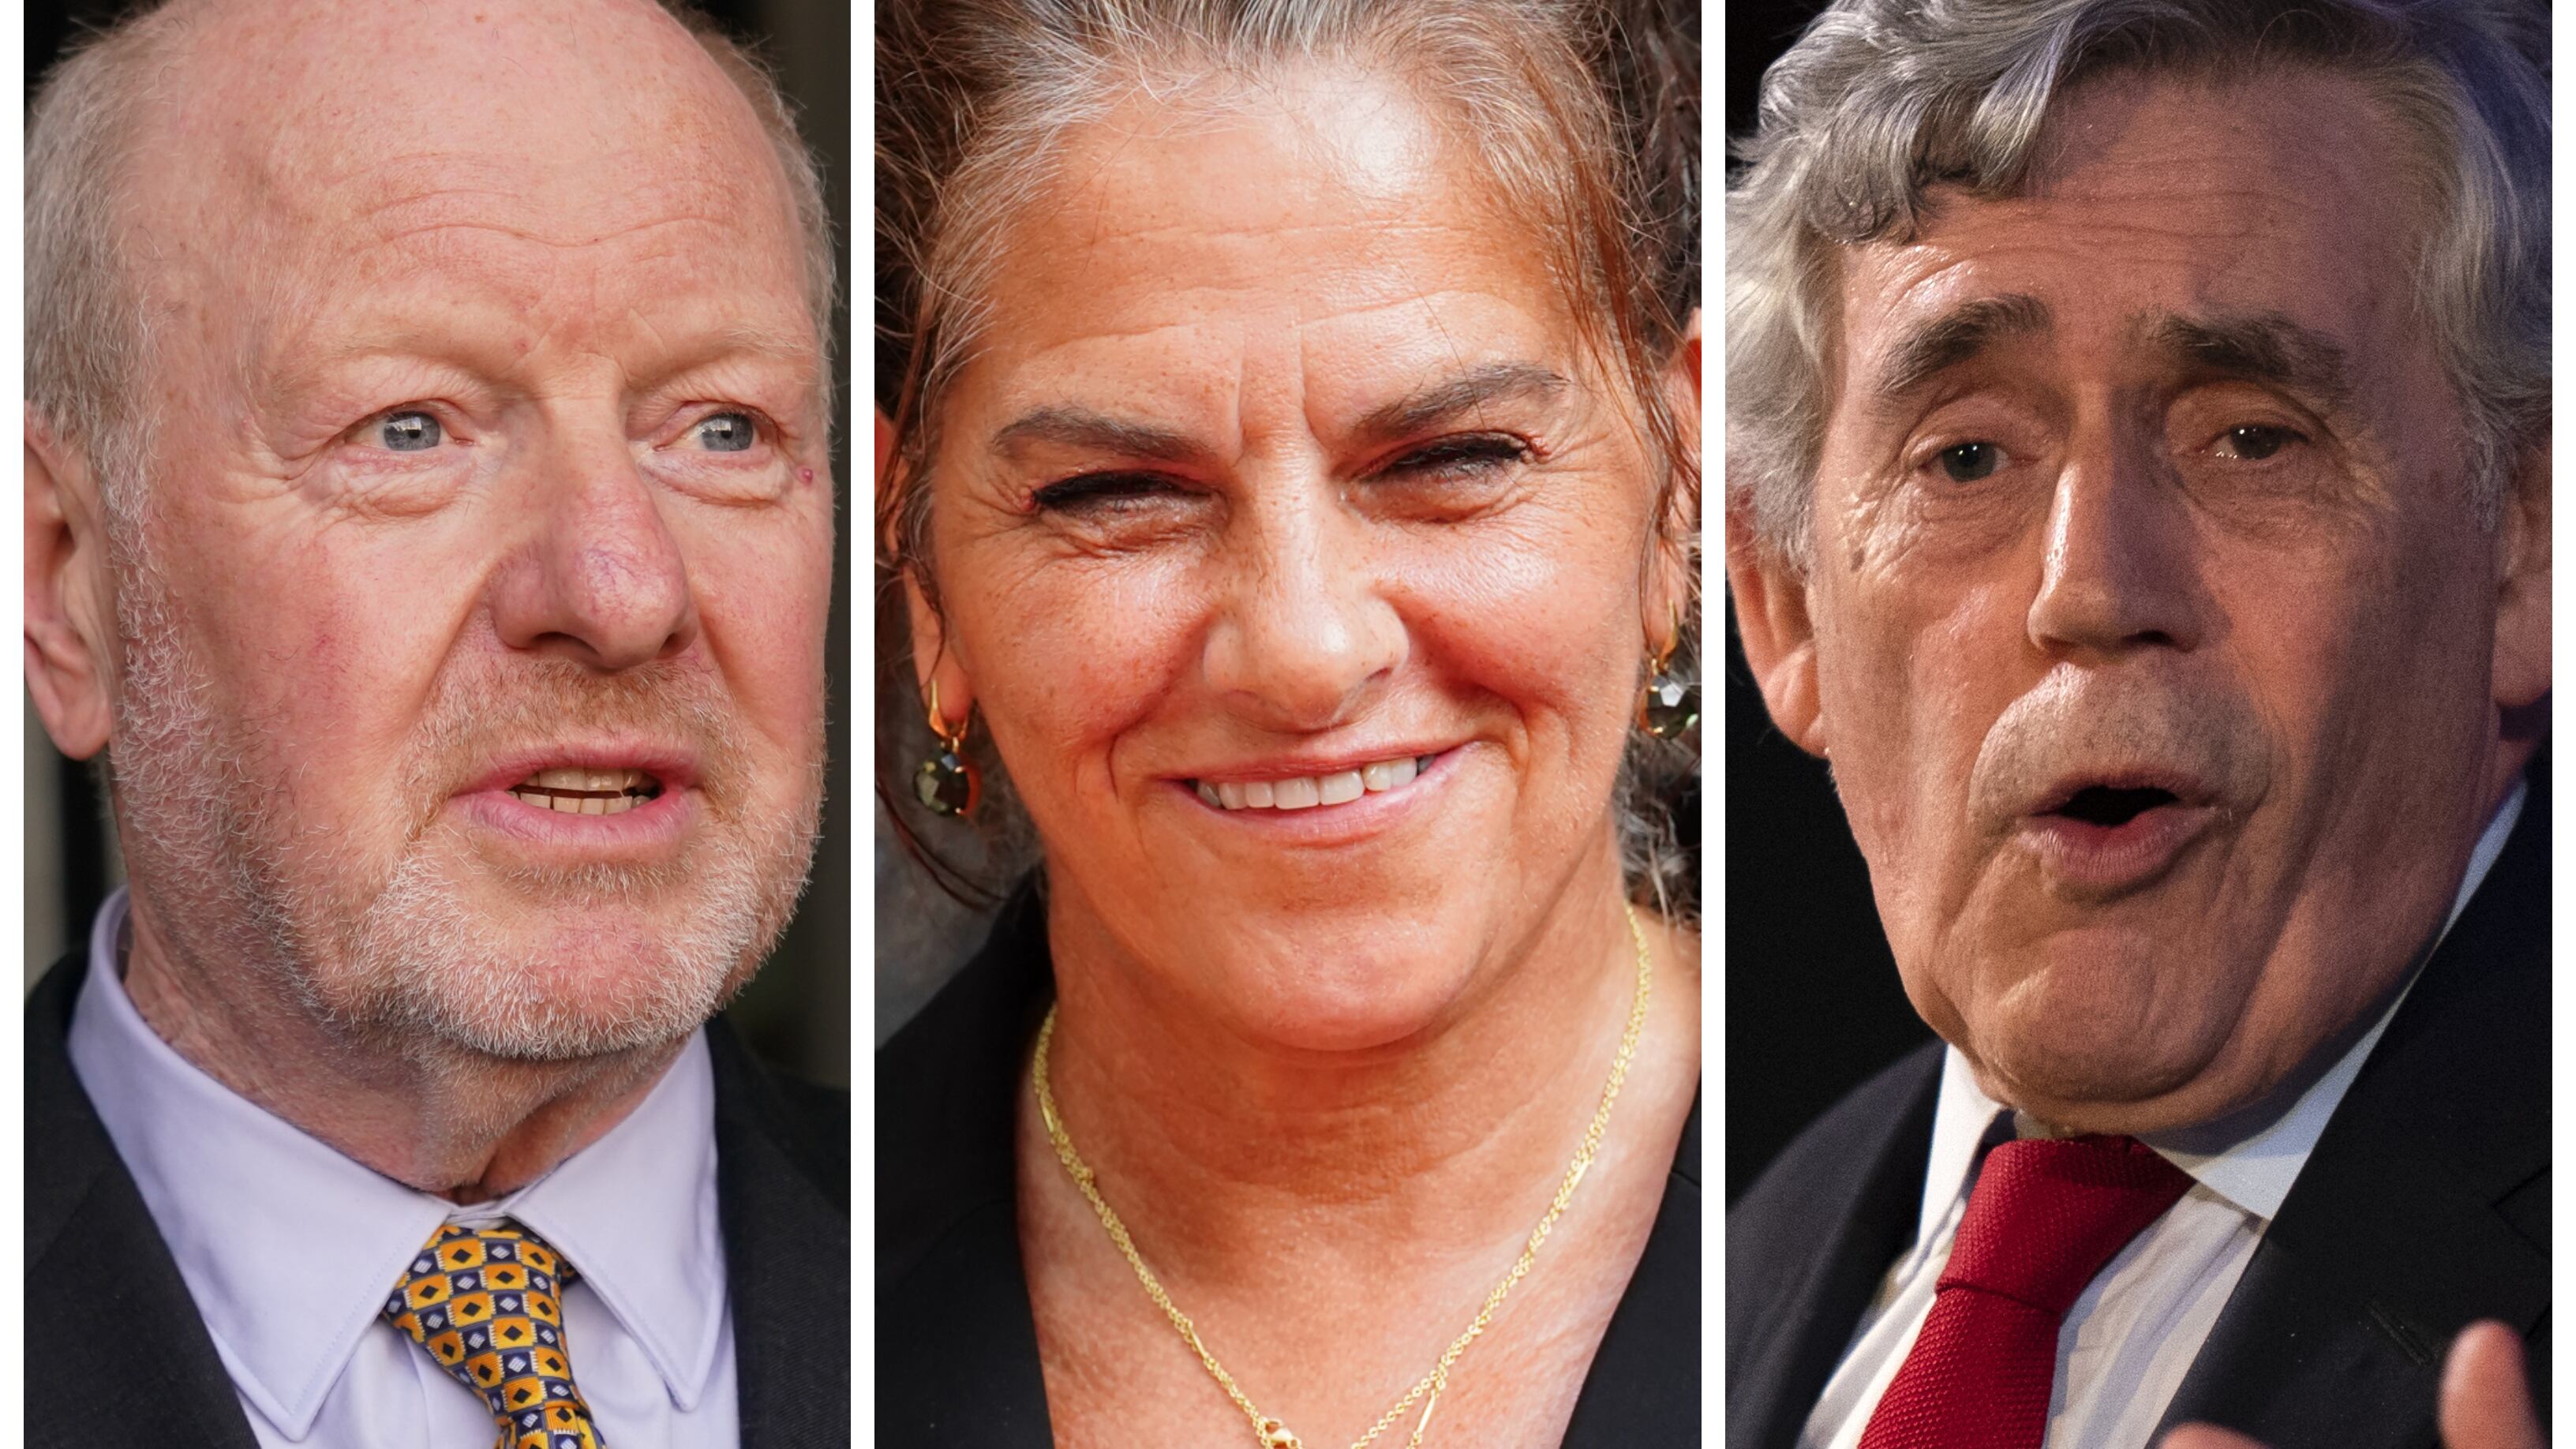 Alan Bates, Tracey Emin and Gordon Brown have been recognised in the King’s Birthday Honours